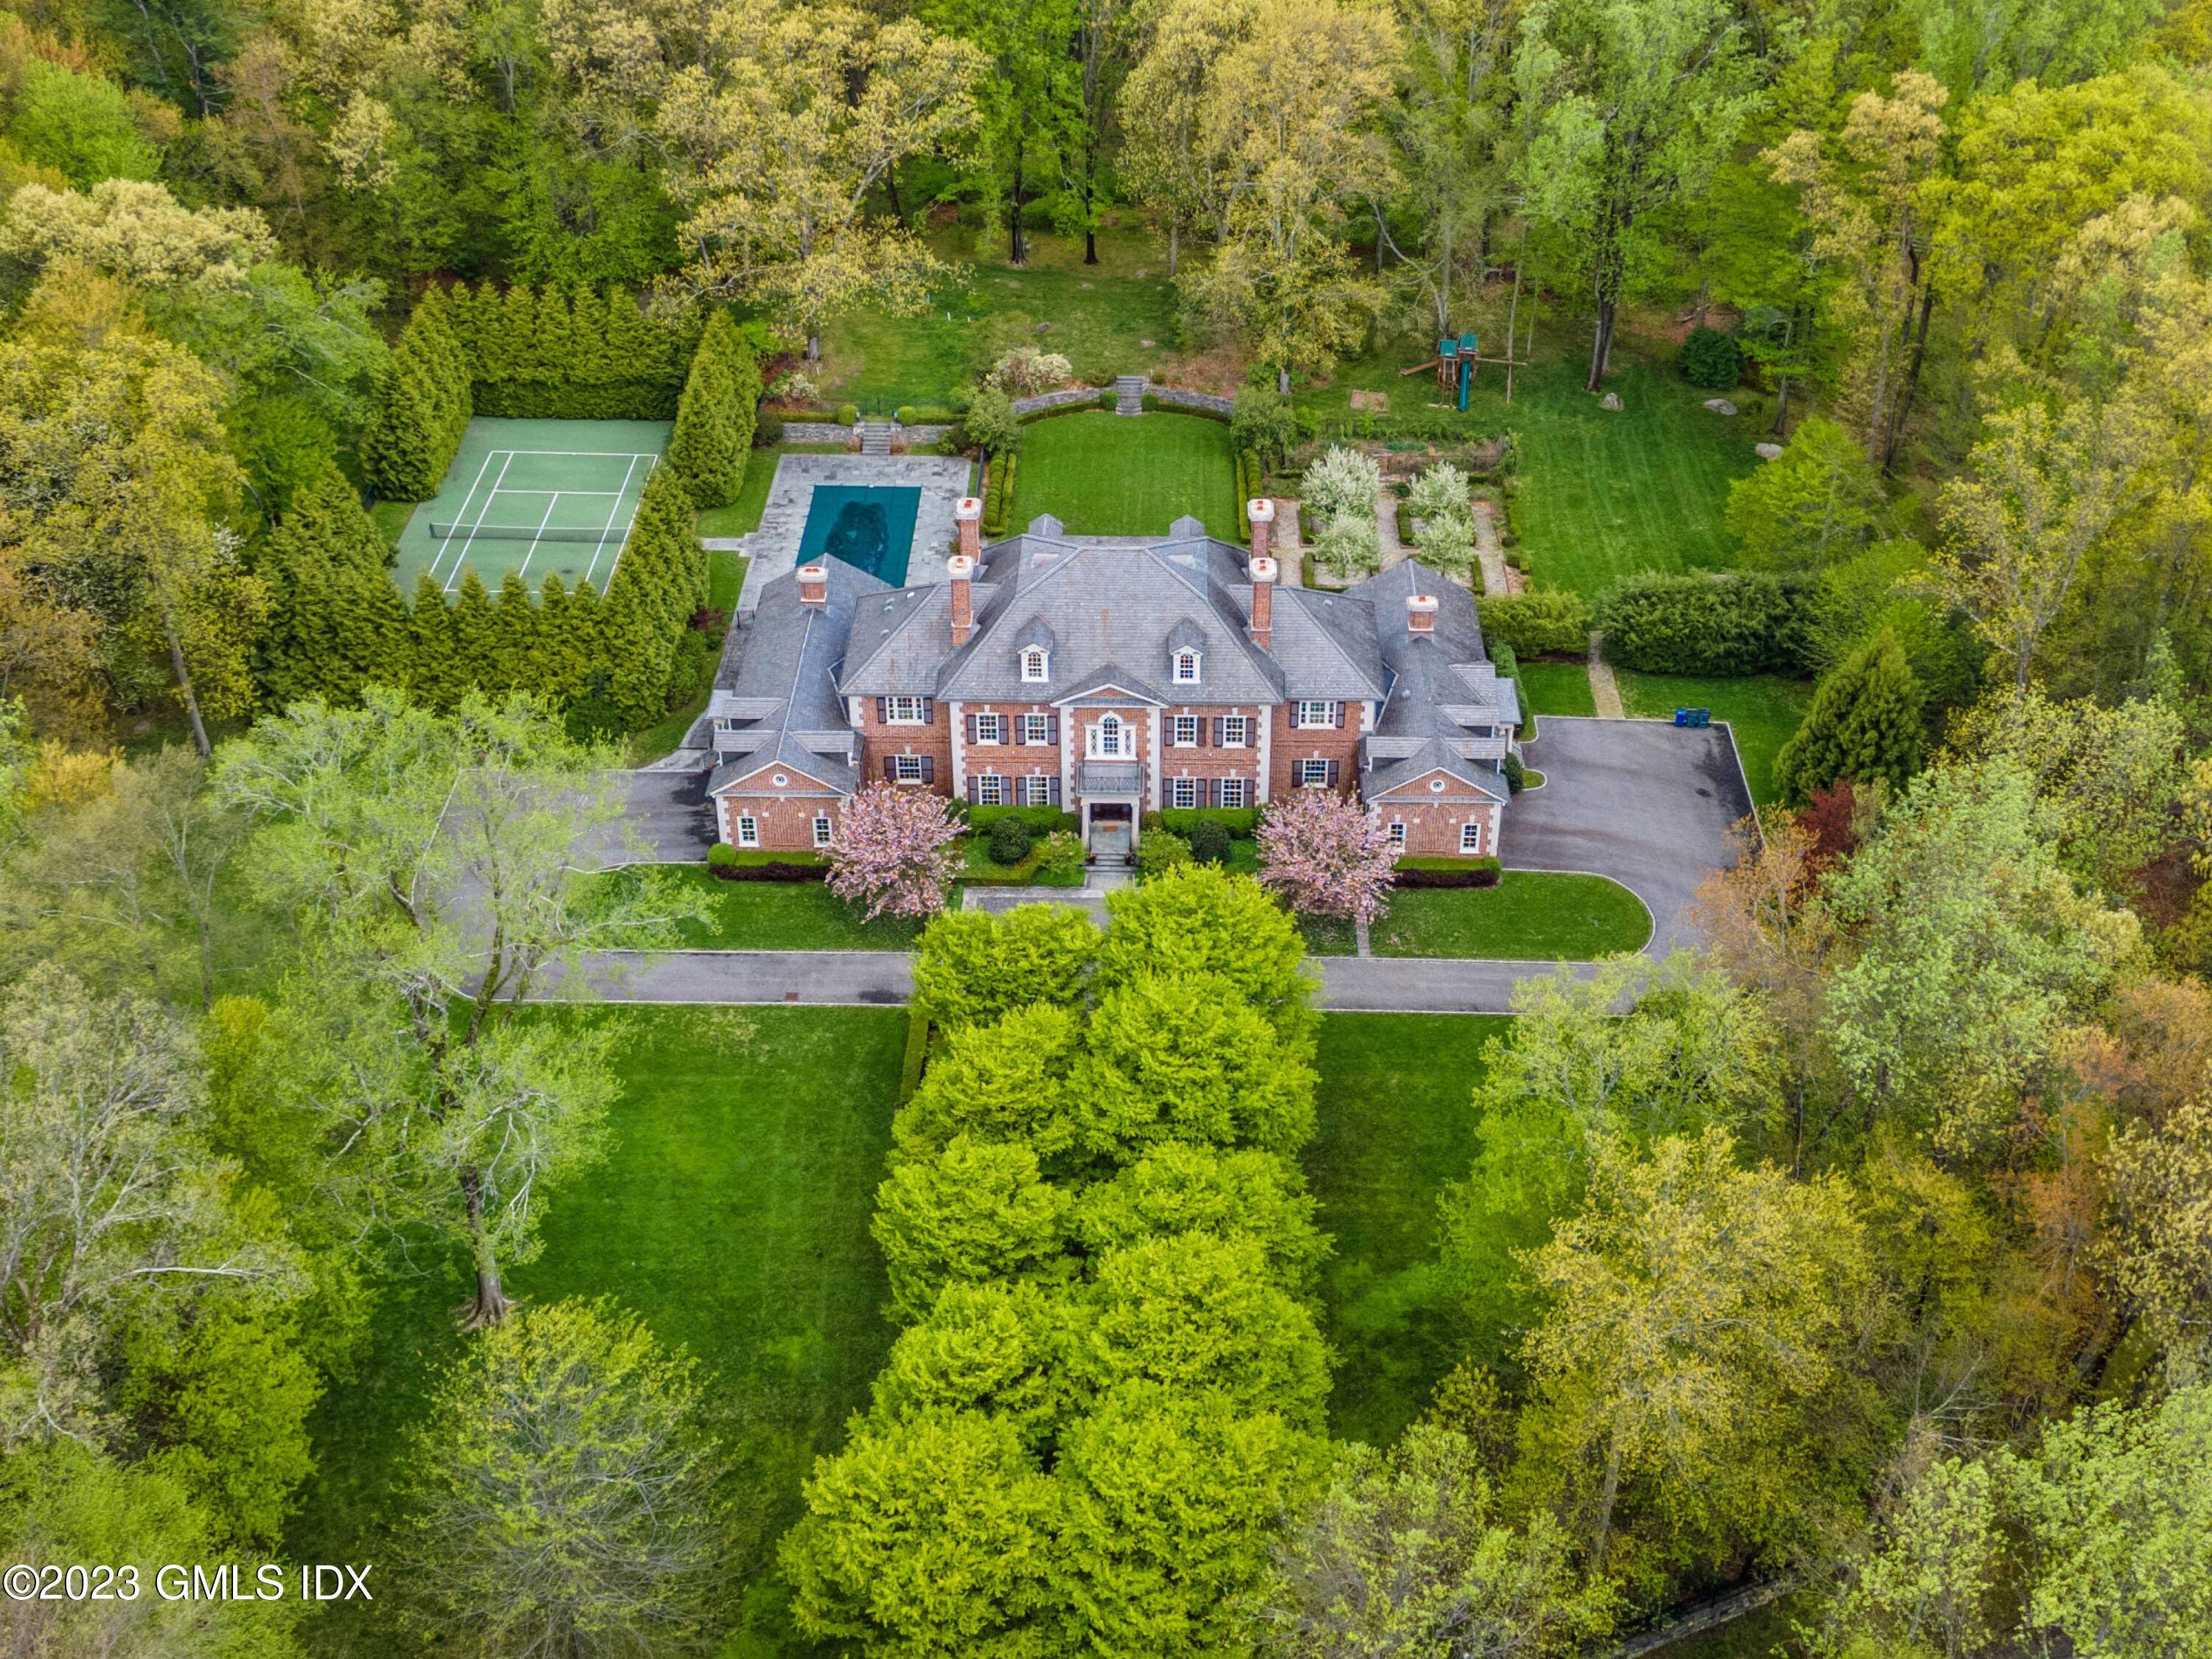 Exquisitely designed Georgian estate by award winning architect Douglas Vanderhorn built by Significant Homes sits on 4 gated acres w a pool, tennis court, gardens, expansive lawns terraces.